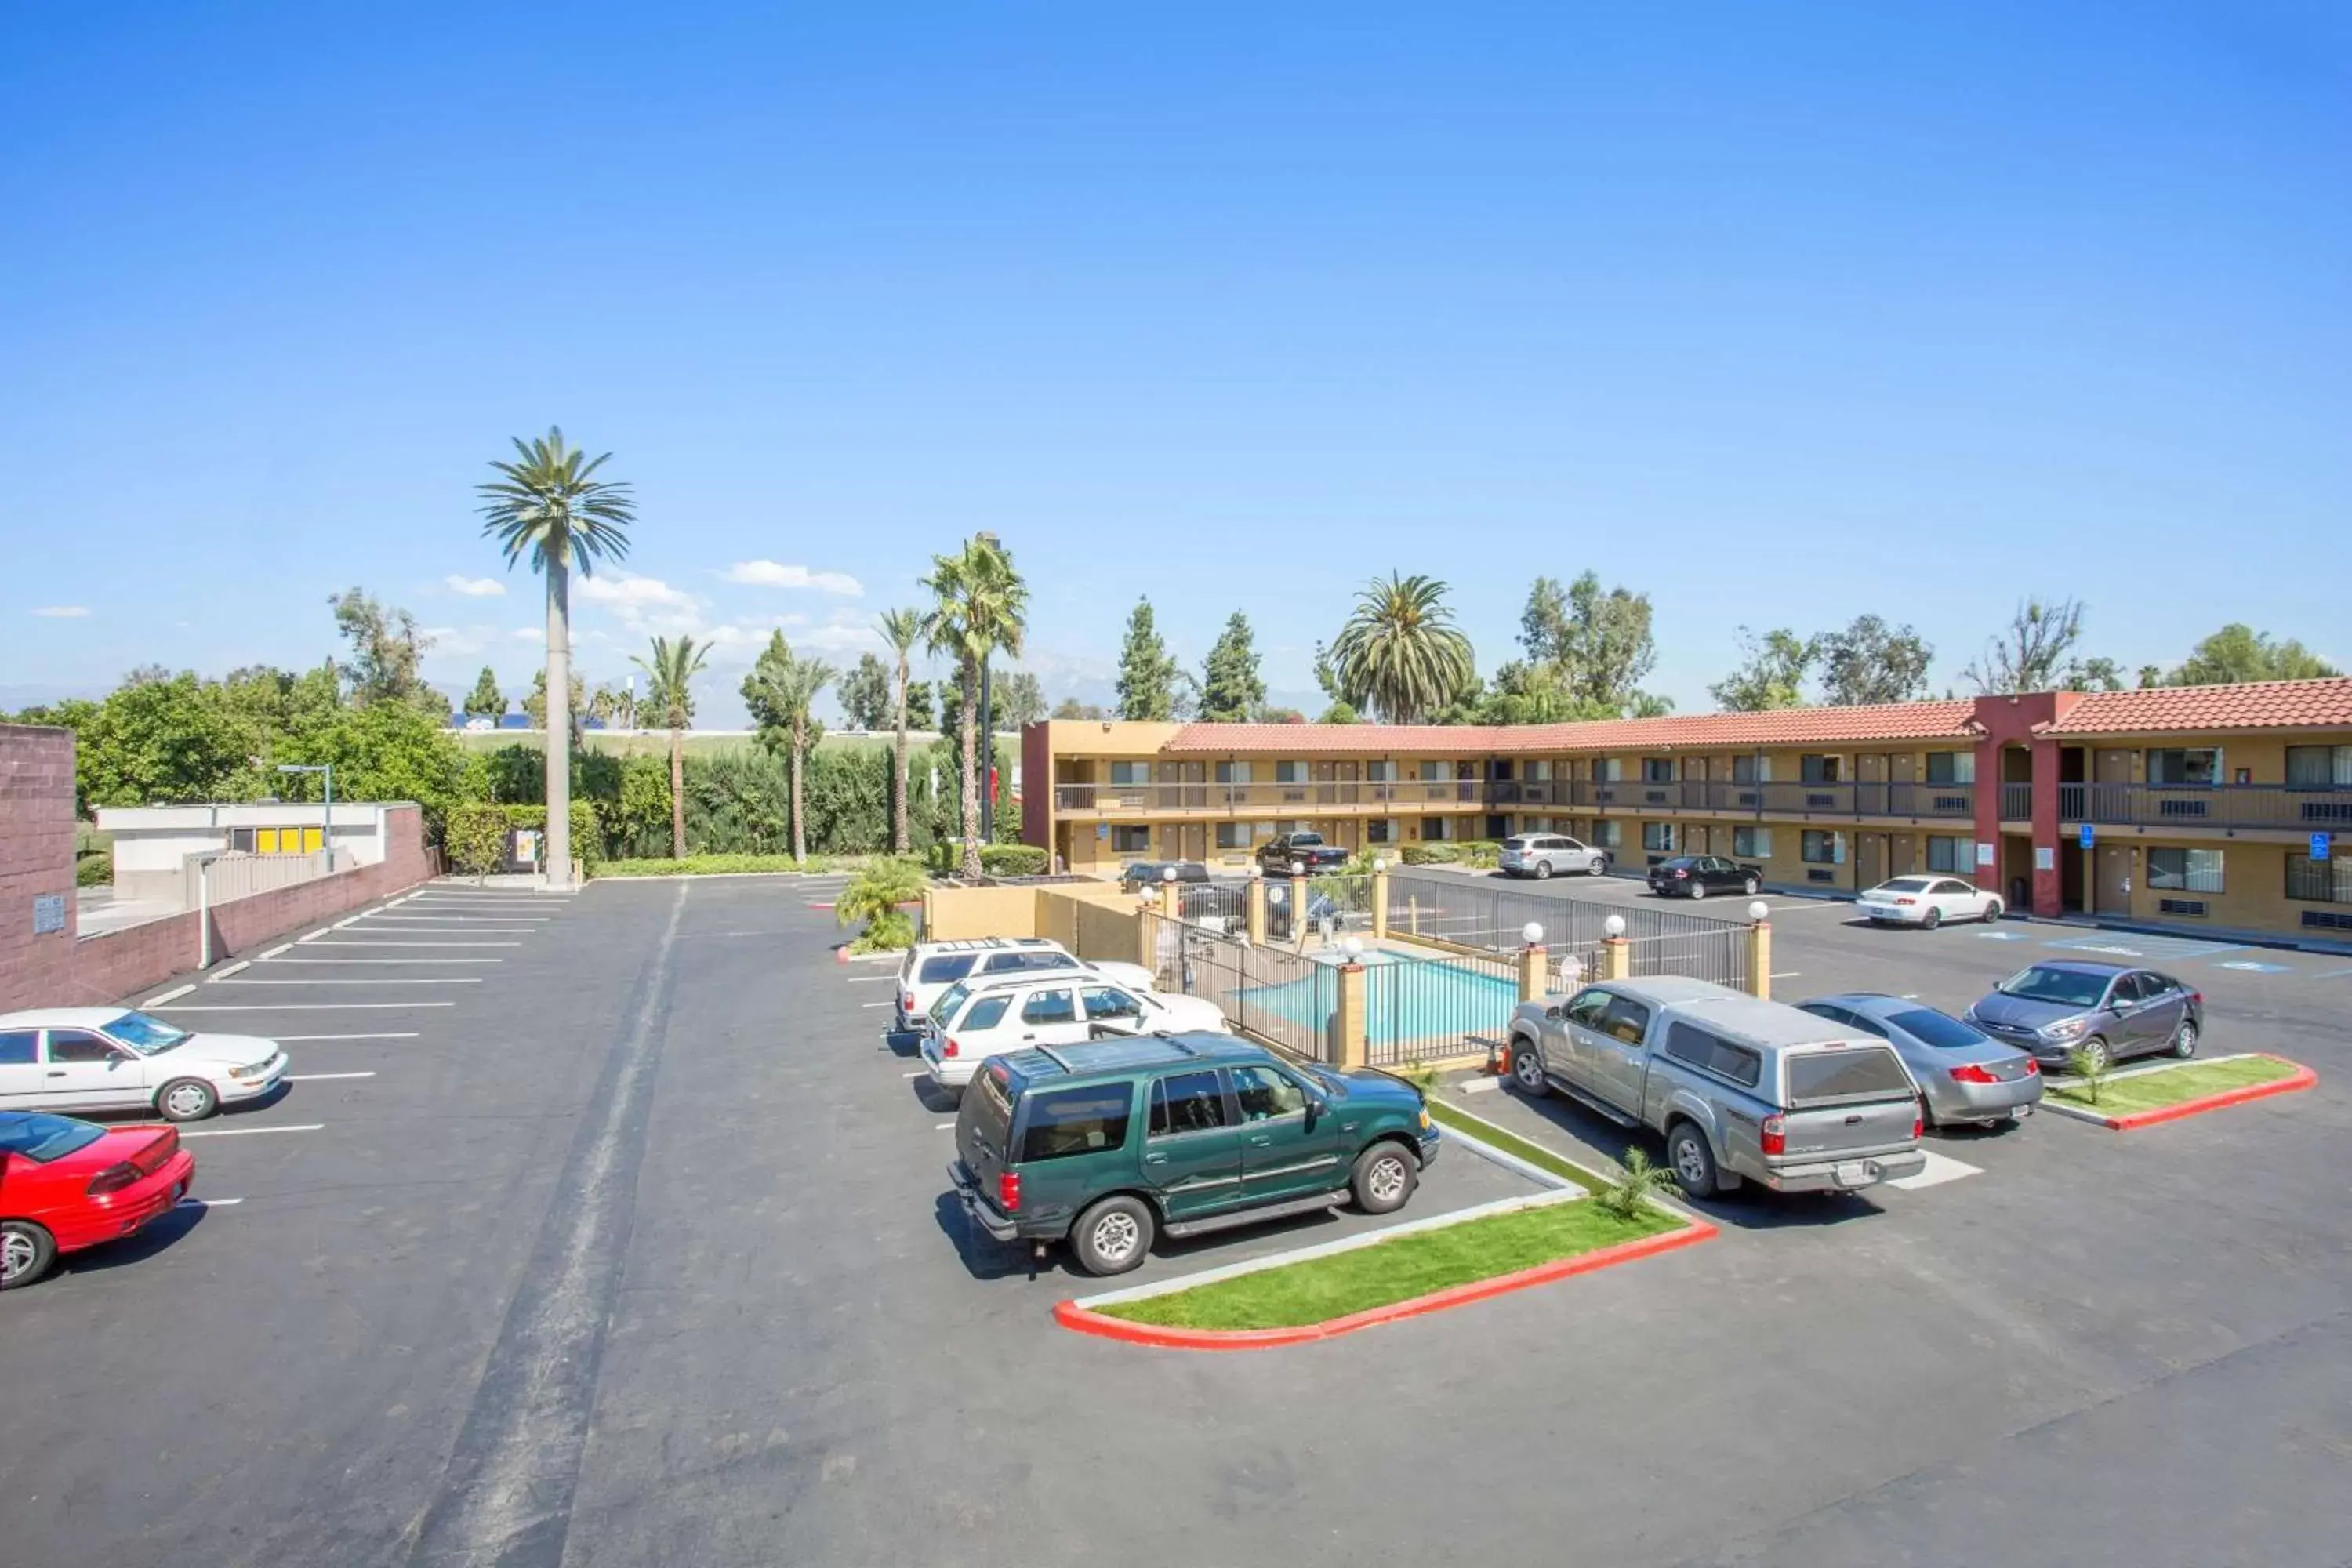 Property building, Neighborhood in Hotel Seville - Ontario Airport/Chino